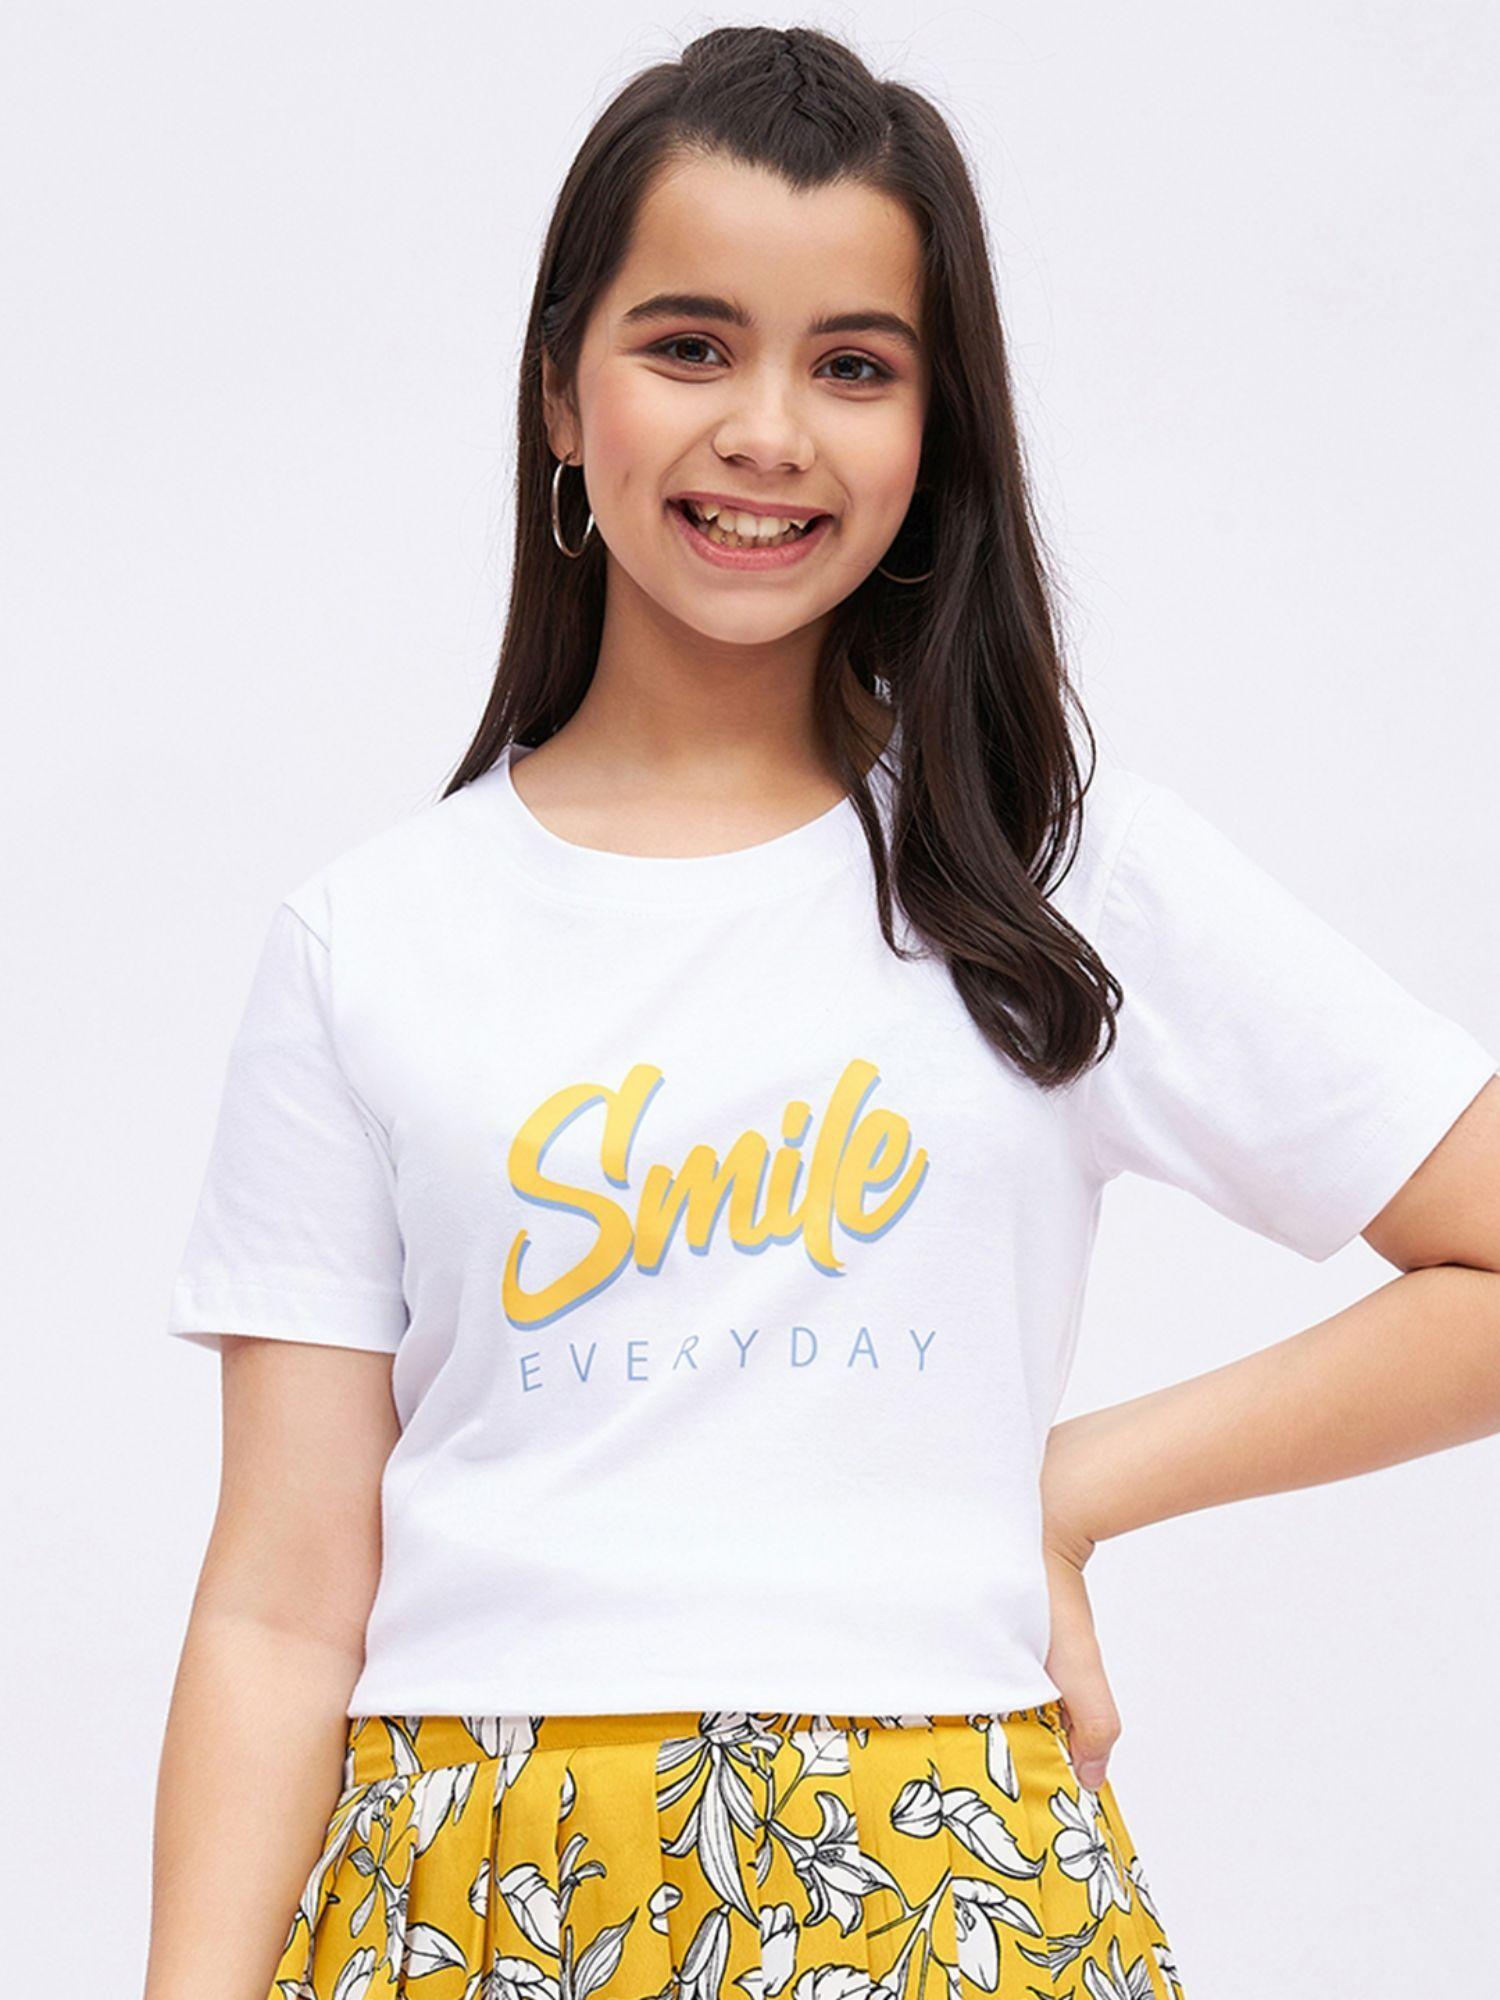 smile everyday printed t-shirt